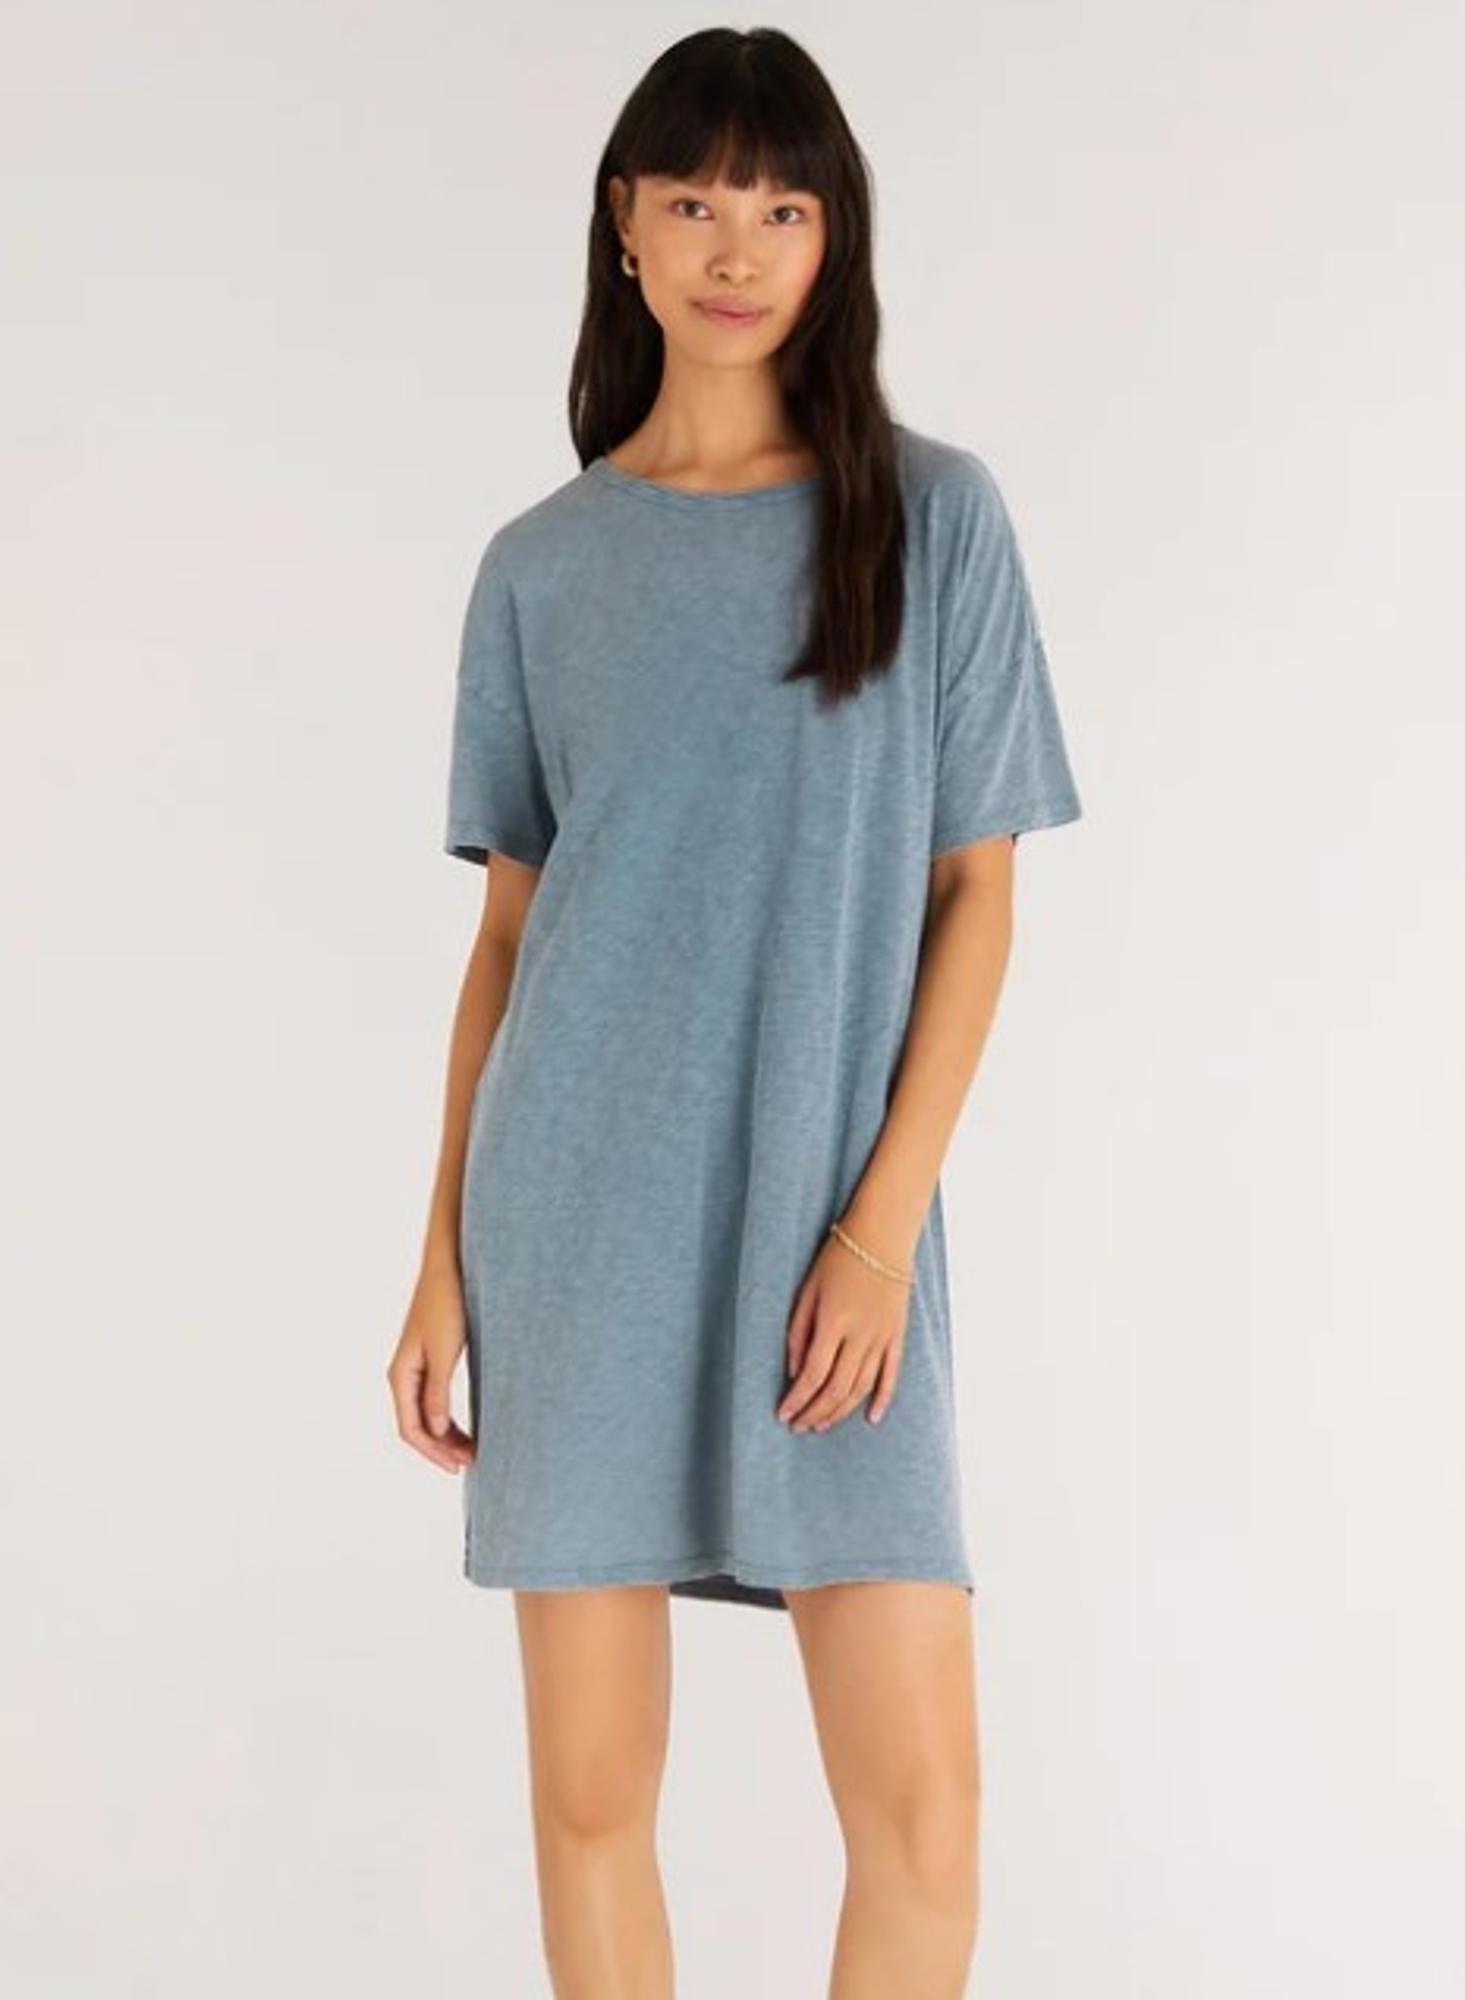 The Relaxed Tshirt Dress